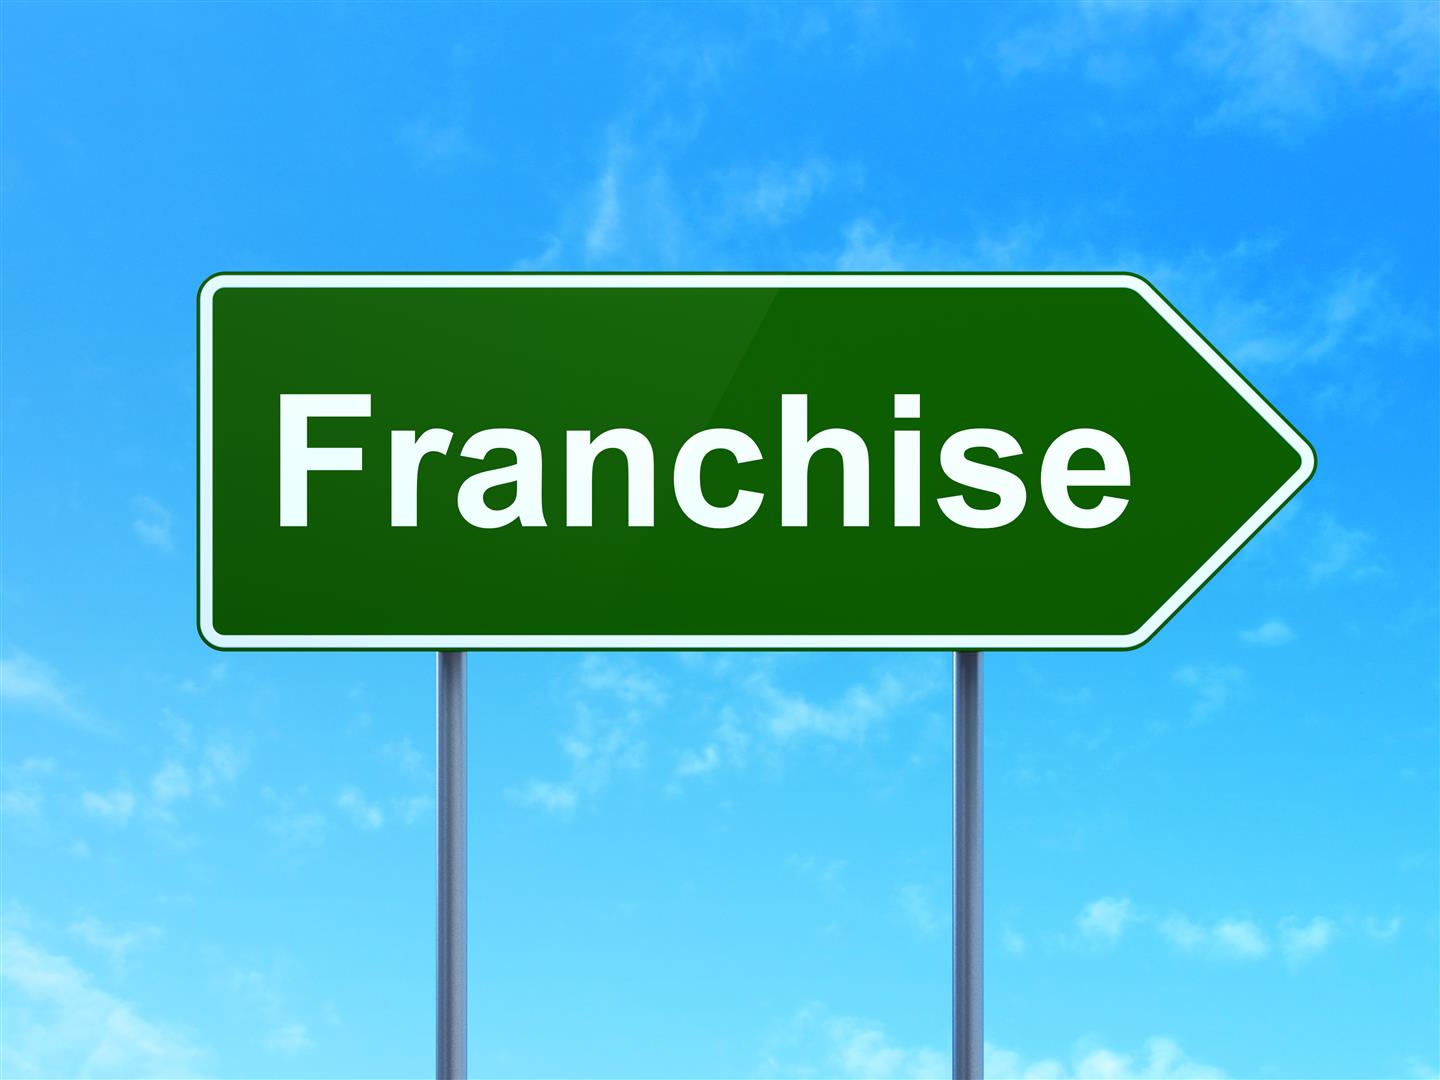 Franchise vs. Independent: 4 Questions to Ask Yourself When Deciding